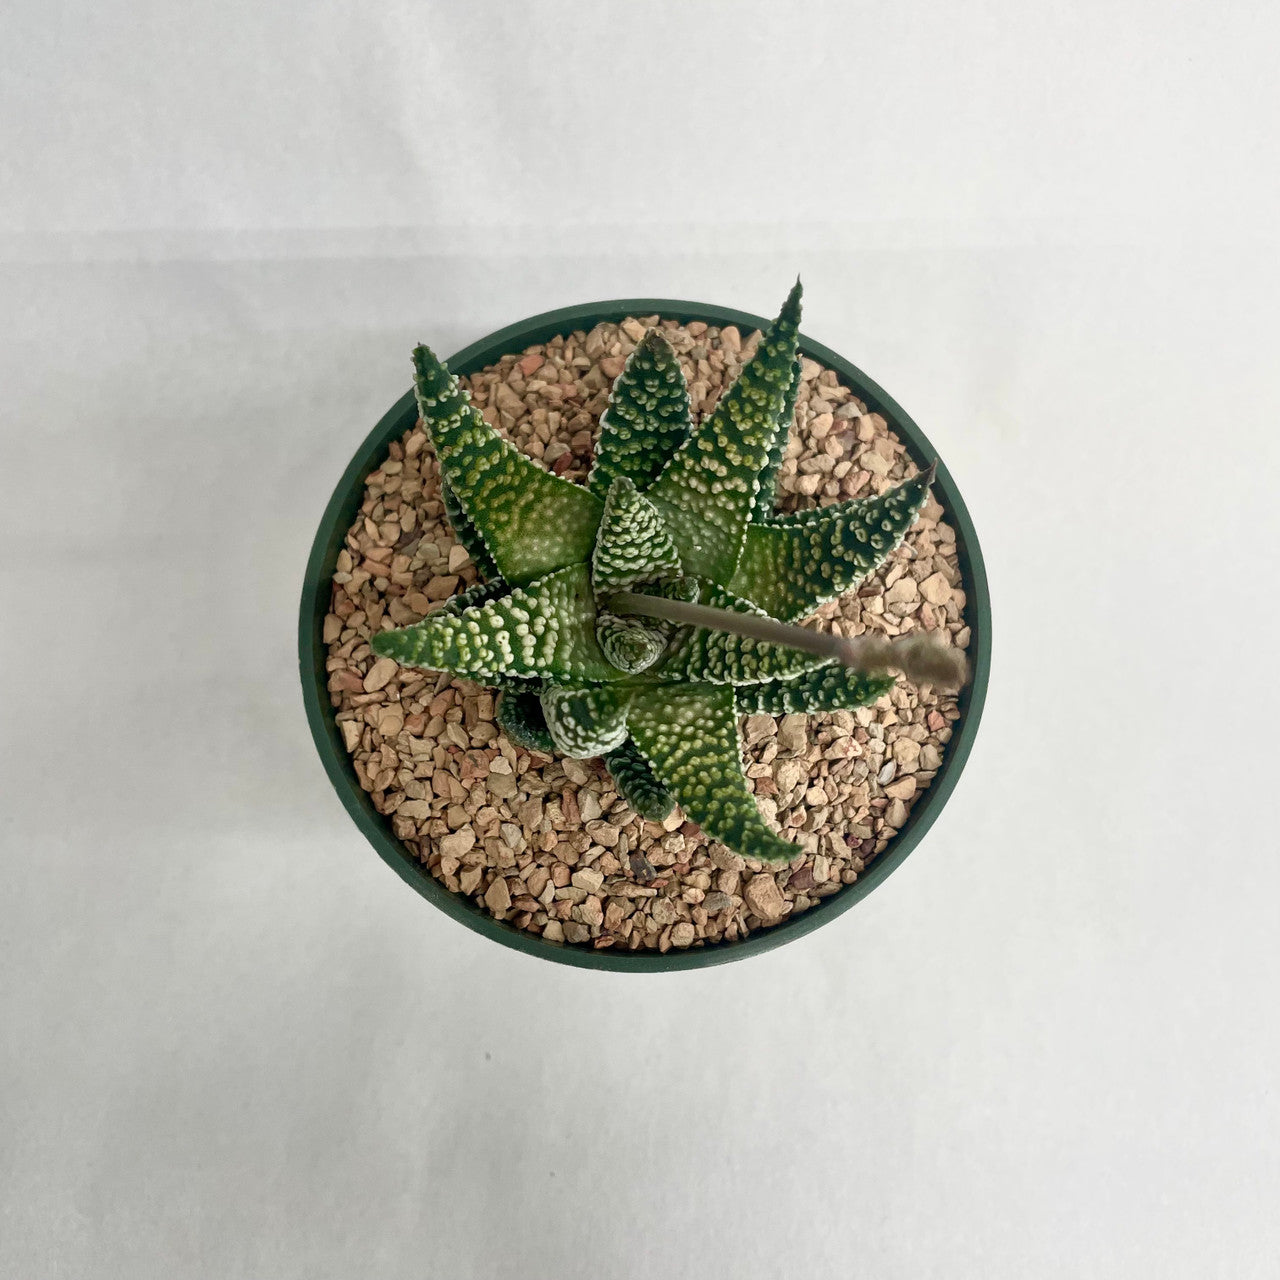 a Haworthia White Albert showing detail from the top